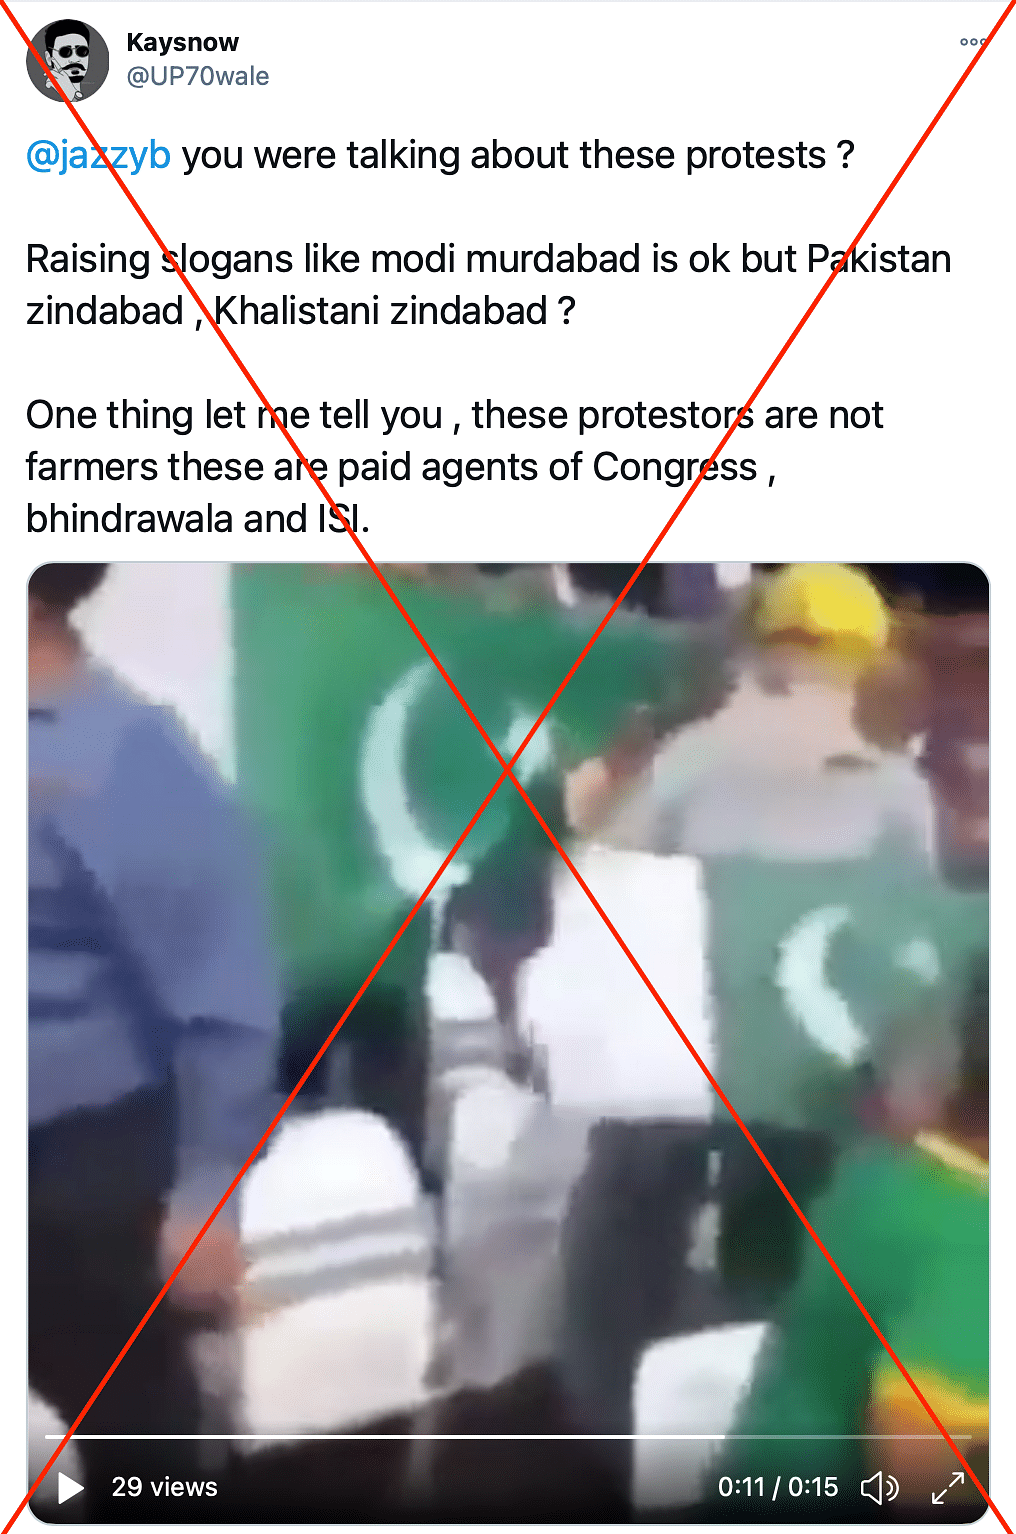 The video is from 2019 when a few Sikh men raised pro-Pakistan and pro-Khalistan slogans during the ICC World Cup. 